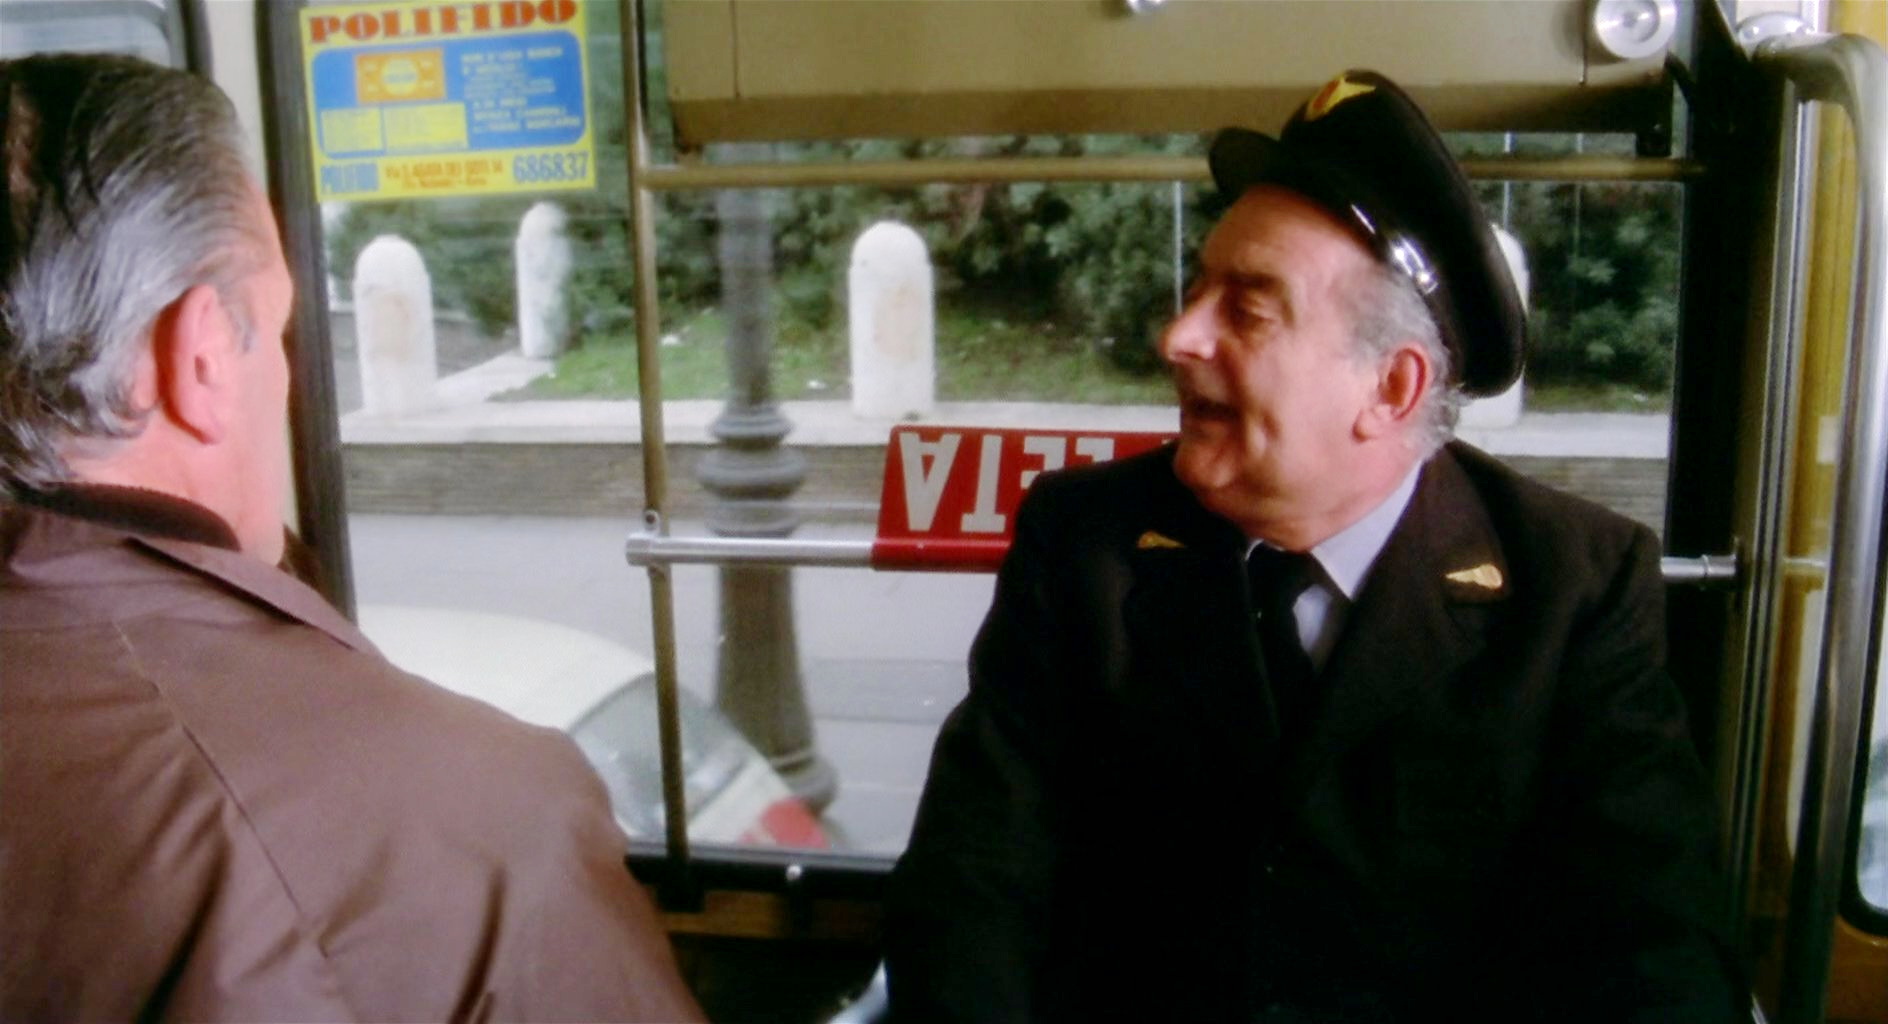 Appassionata (1974) Ticket collector on the bus 2.jpg